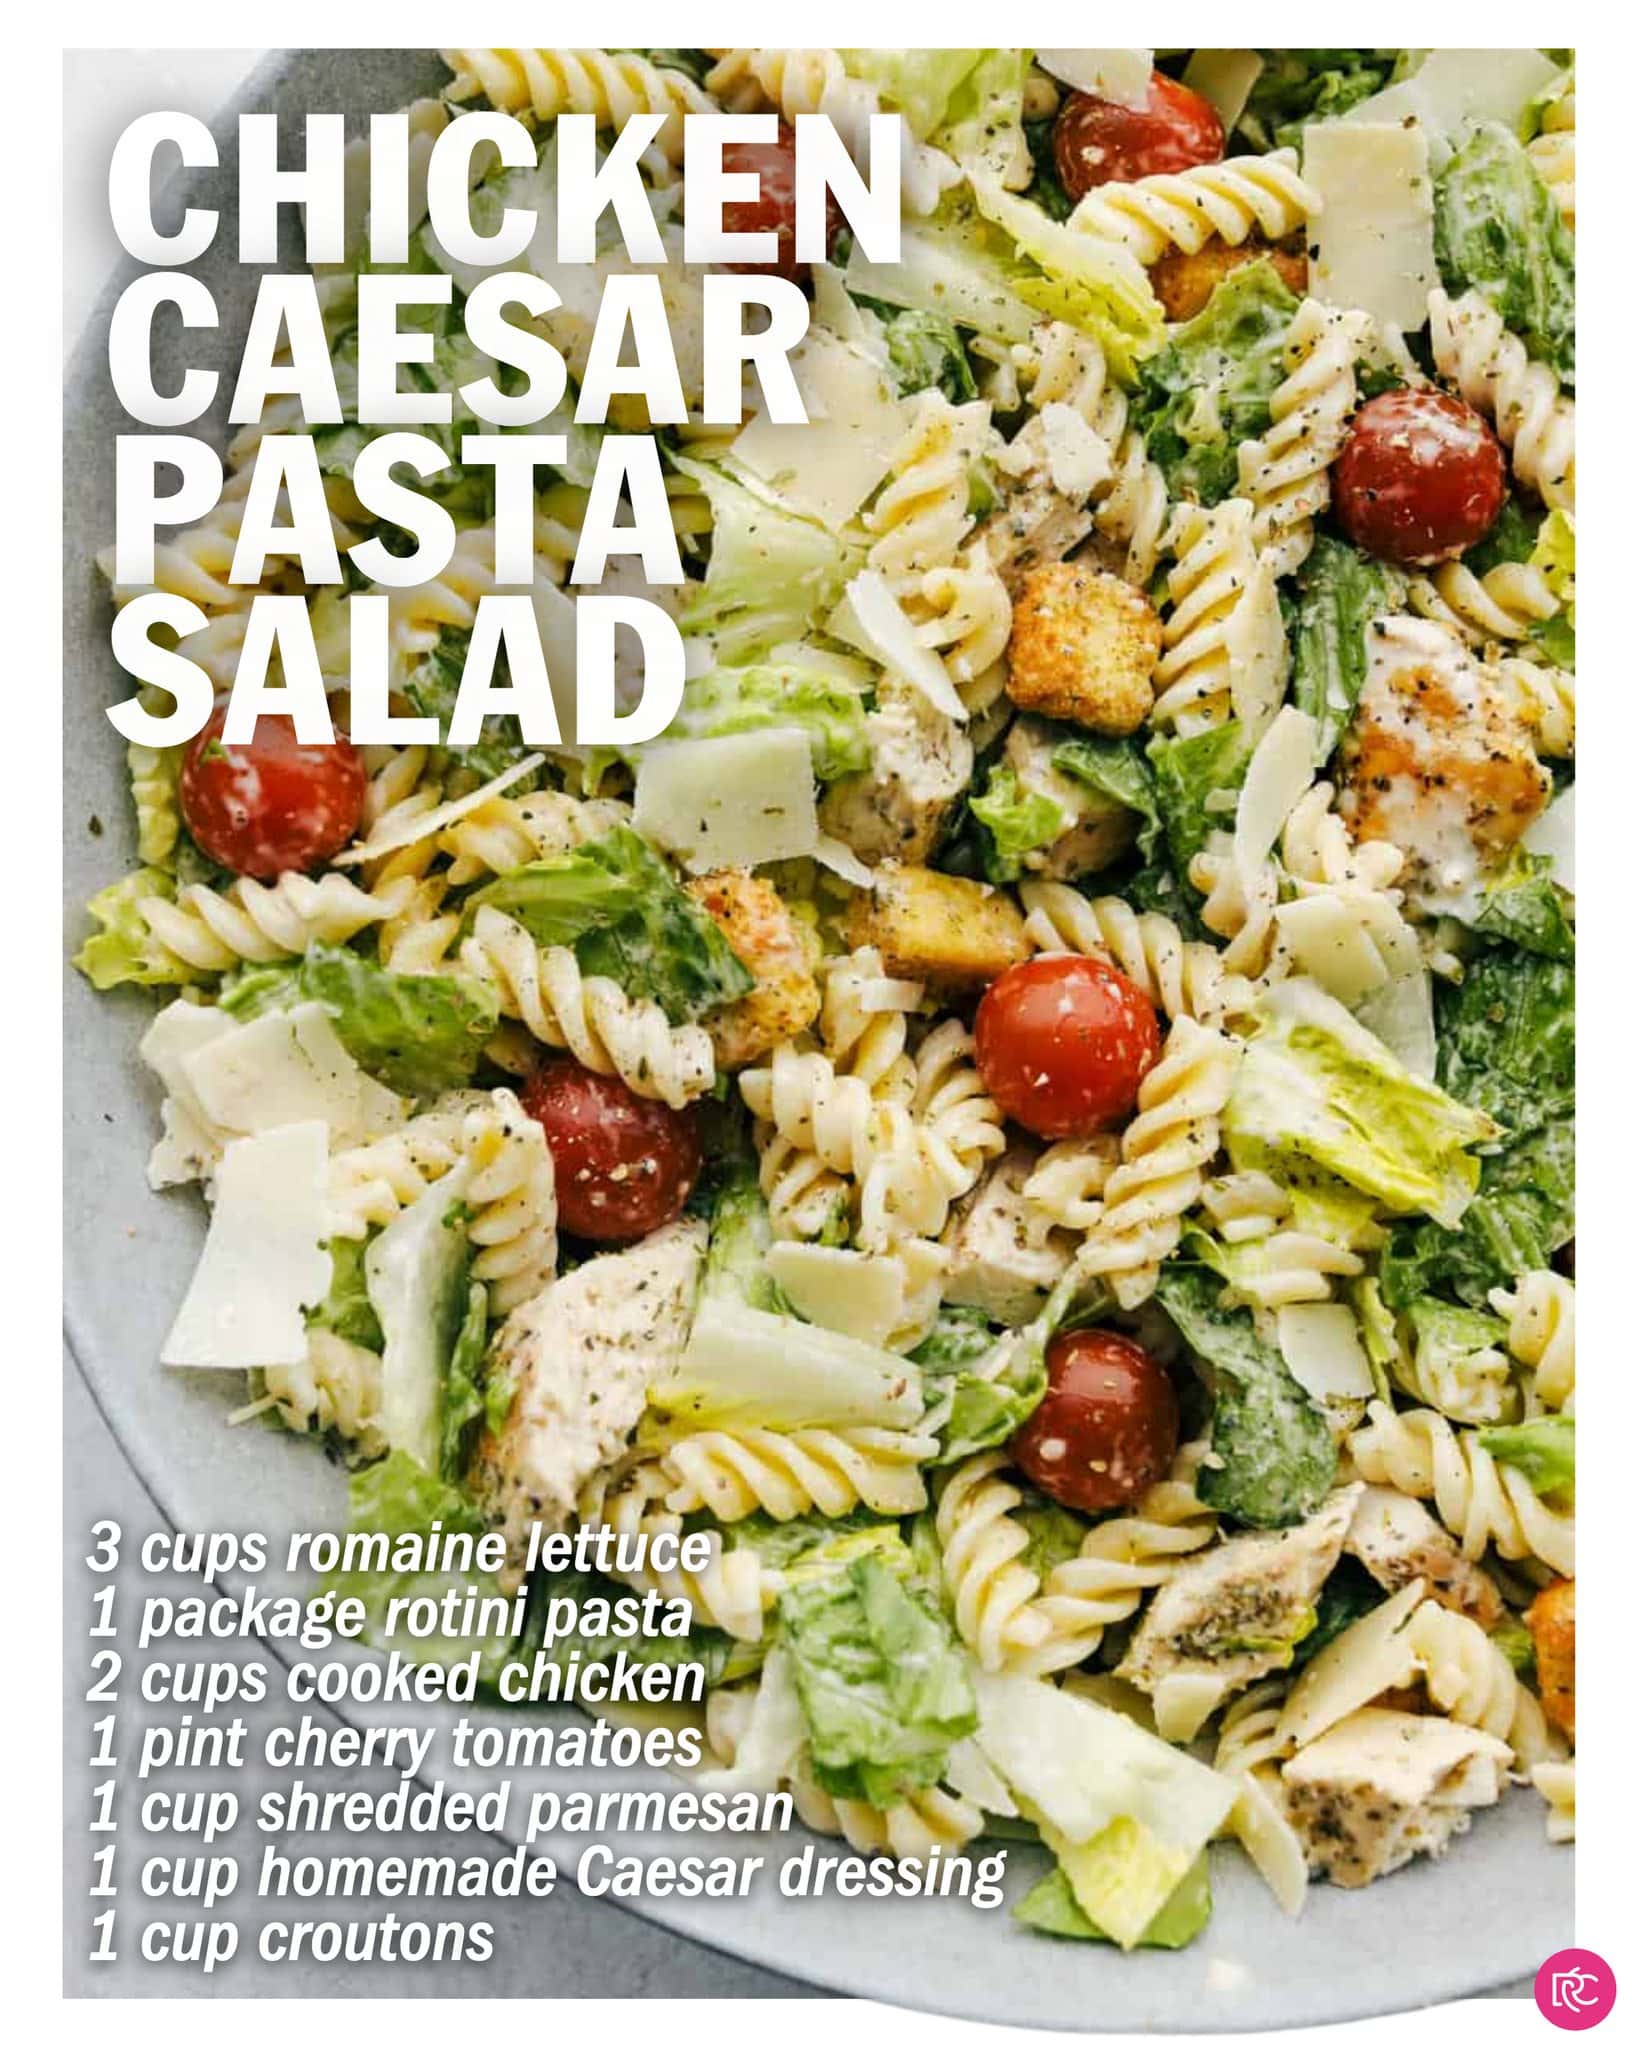 Image of a chicken caesar pasta salad, perfect for easy dinner ideas. Ingredients include romaine lettuce, rotini pasta, cherry tomatoes, shredded chicken, Caesar dressing, and croutons. Bright